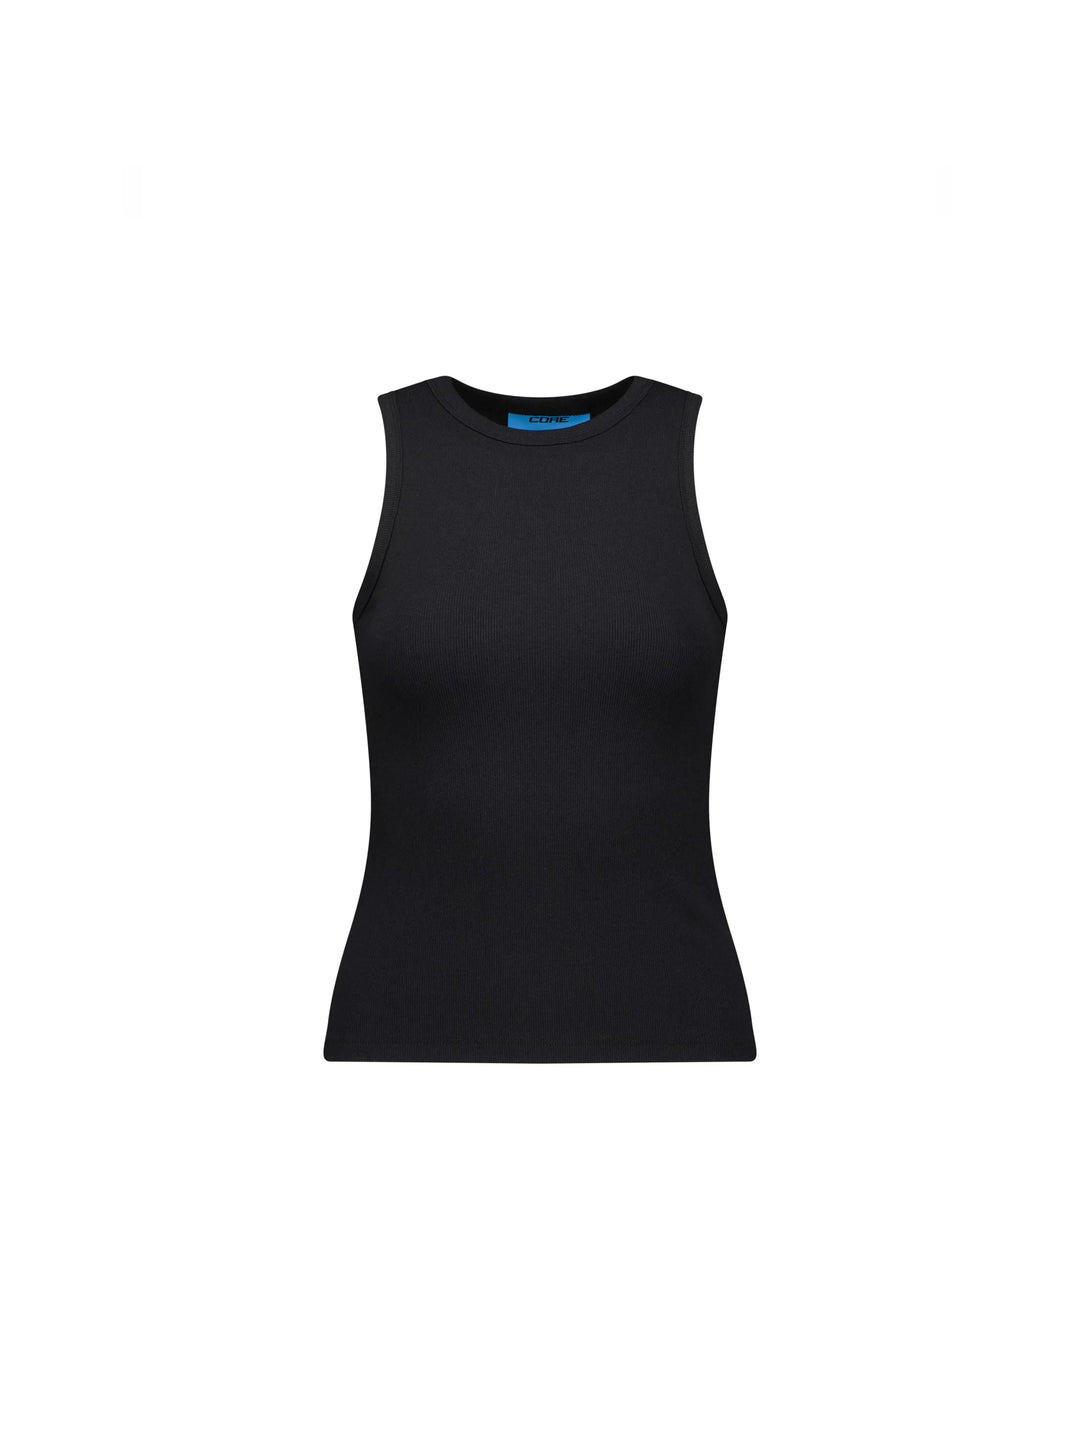 CORE Essential Fitted Ribbed Tank Ater in Auckland, New Zealand - Shop name